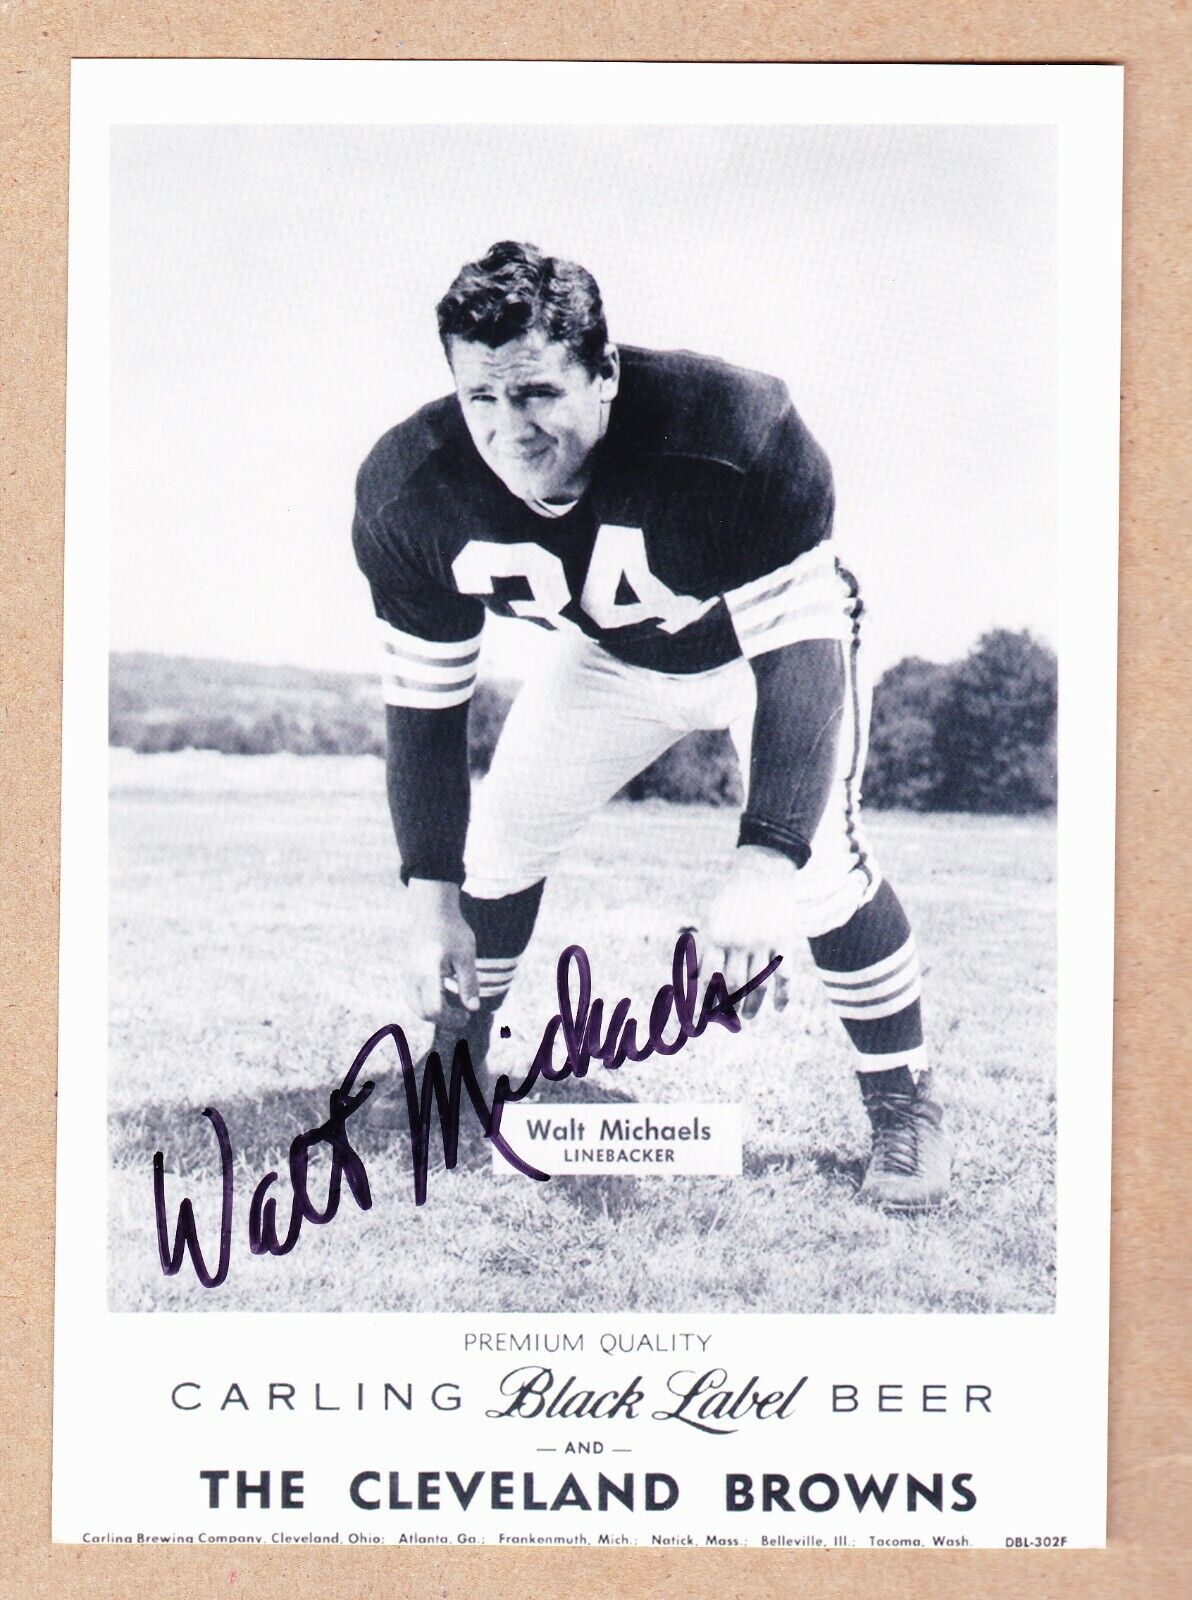 Walt Michaels(DEC) 1959 signed 5x7 Cleveland Browns B&W Photo Poster painting-All-Pro1955-59